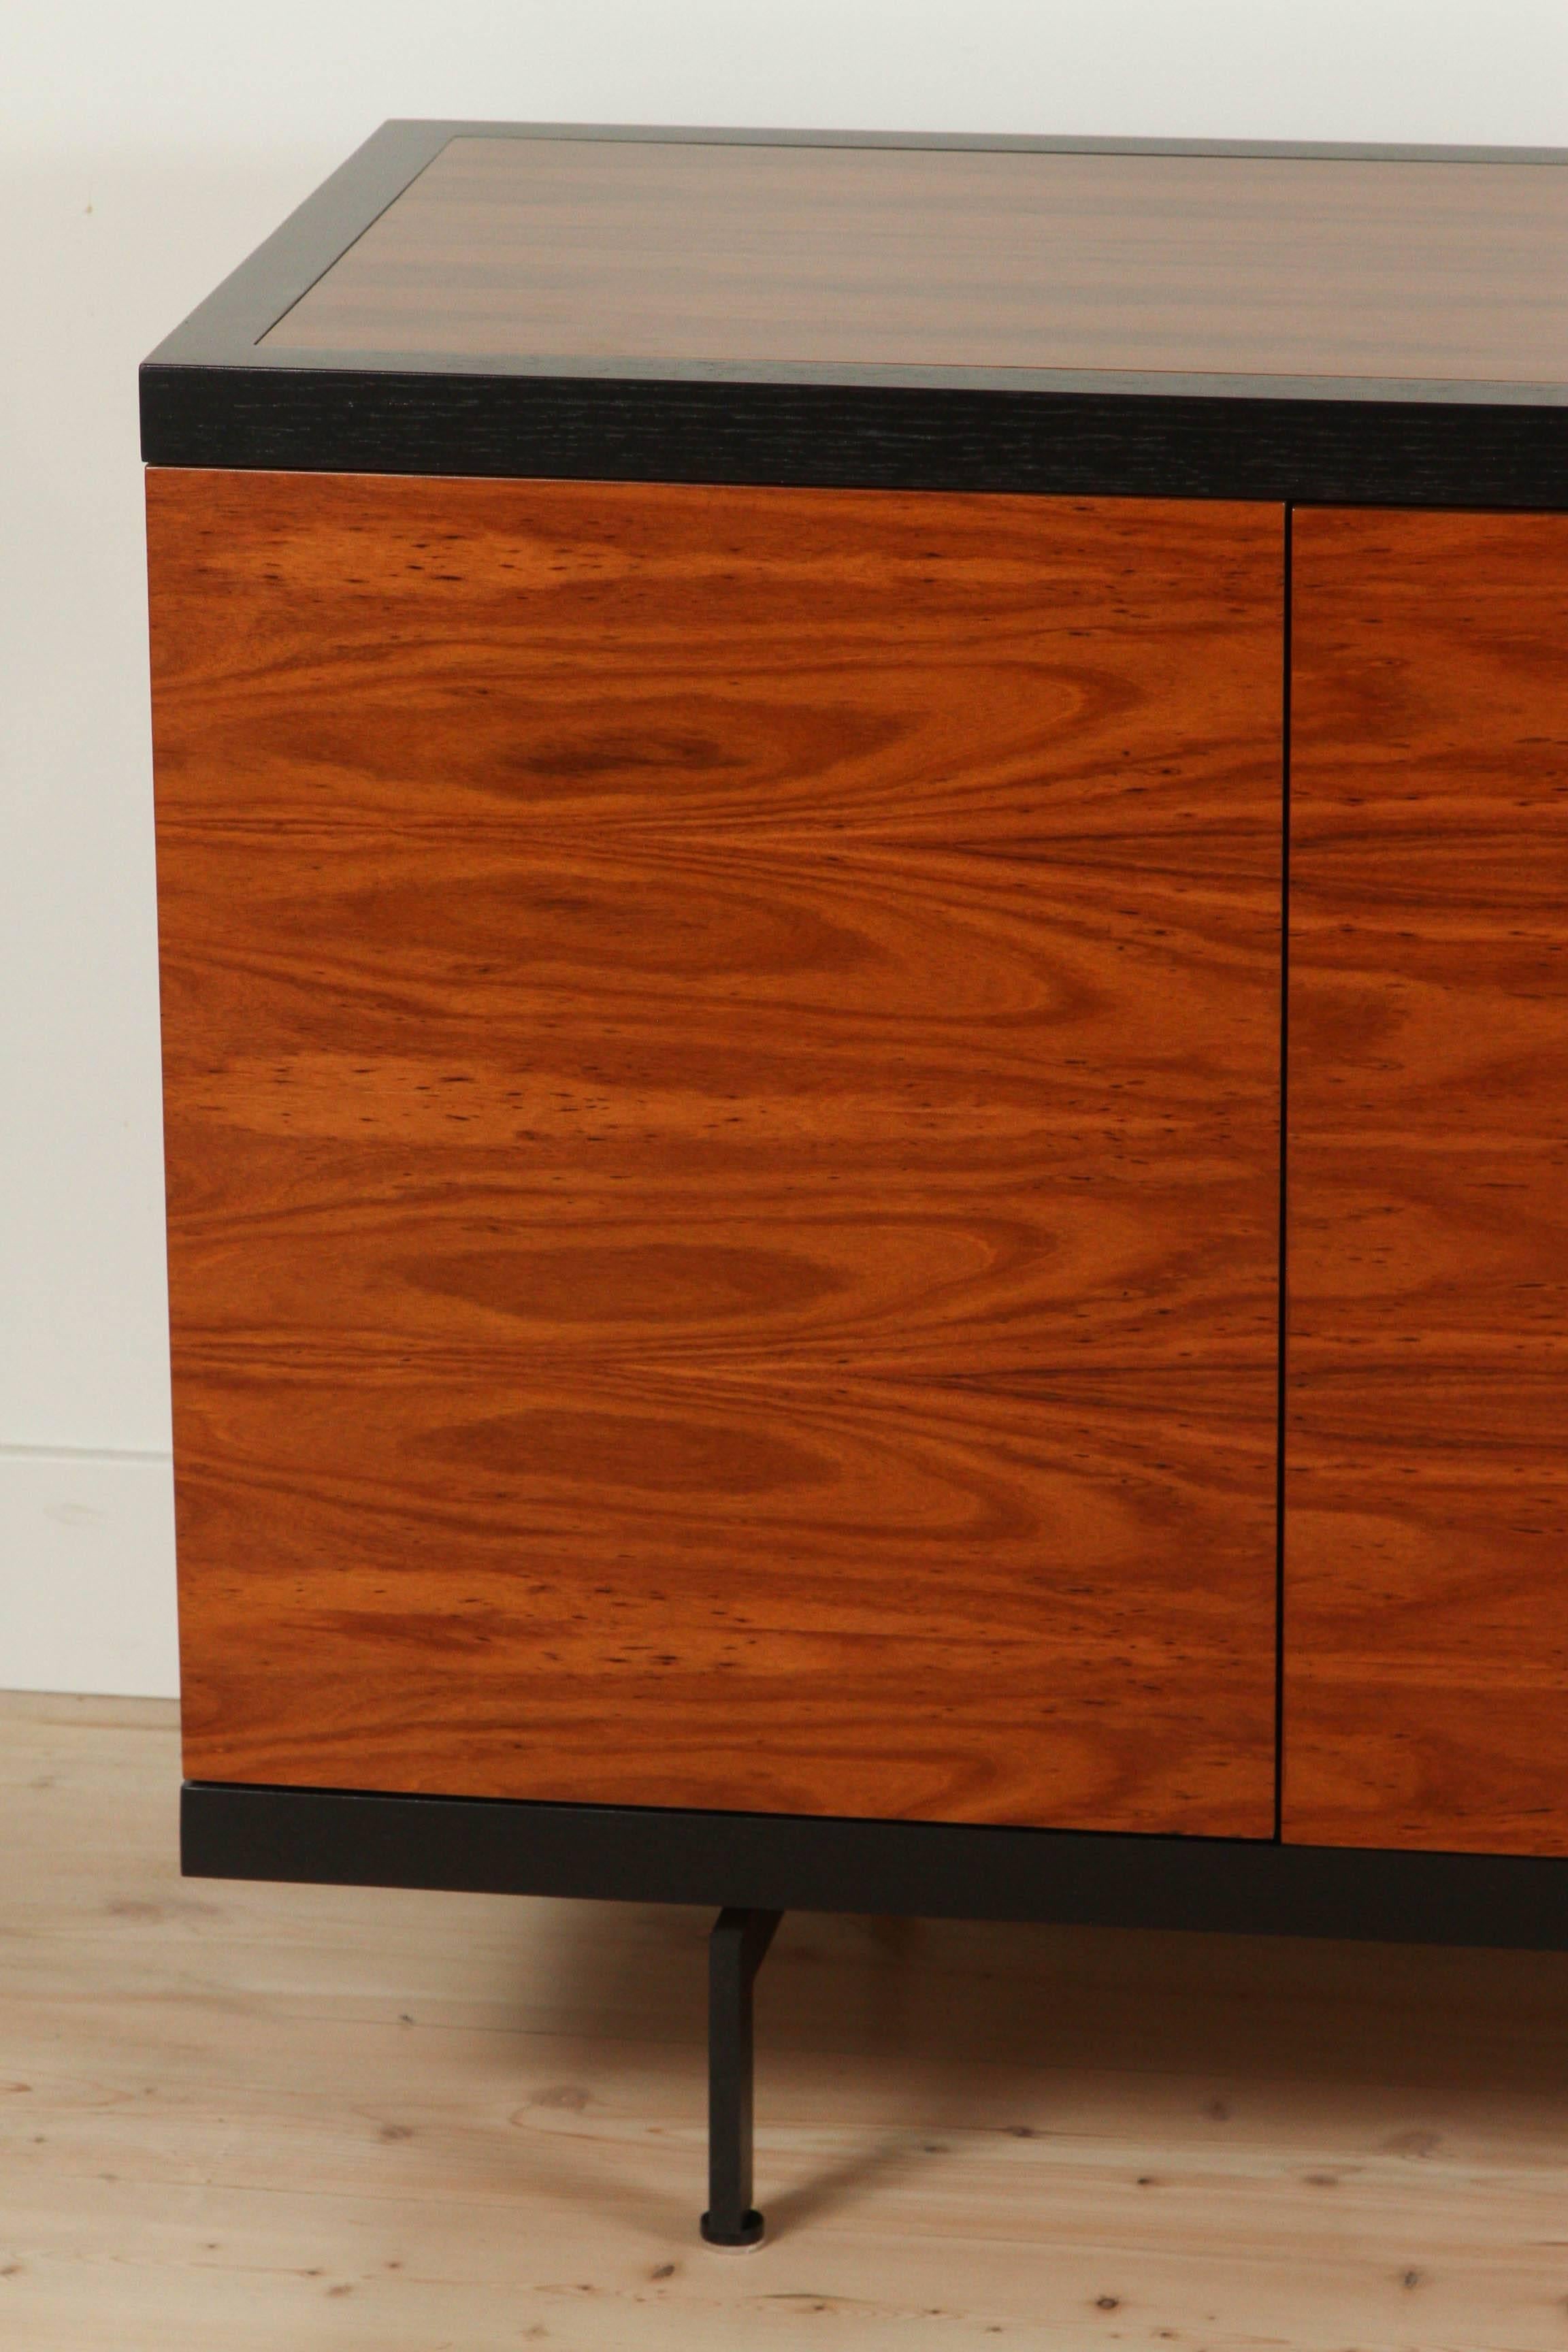 Four-door rosewood Dimas cabinet by Lawson-Fenning.

Available to order in various finishes with a 10-12 week lead time. 